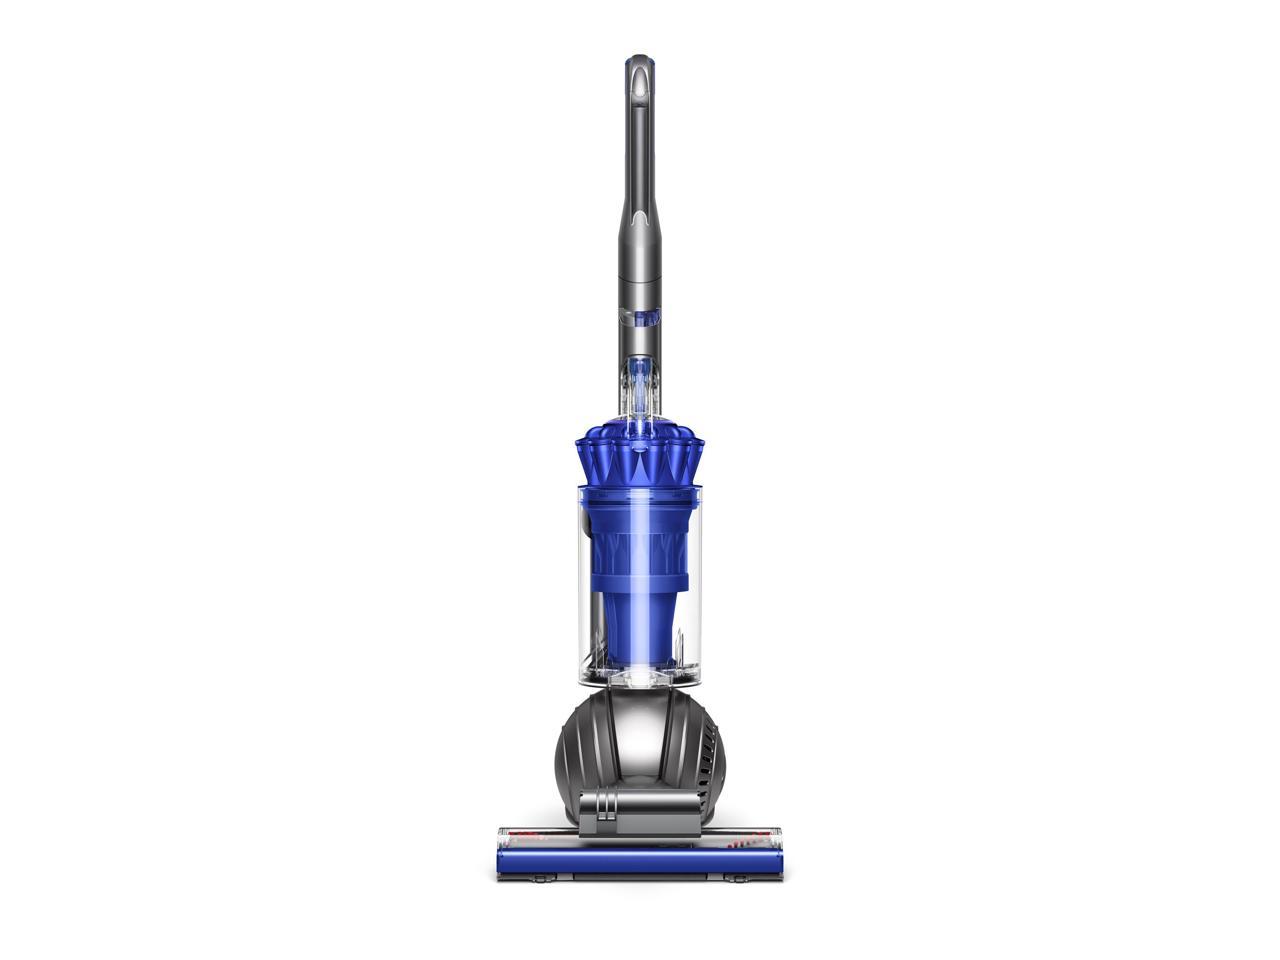 Dyson Ball Animal 2 Total Clean Upright Vacuum (Blue, Refurbished) + $20 Newegg Promo Gift Card $170 + Free shipping